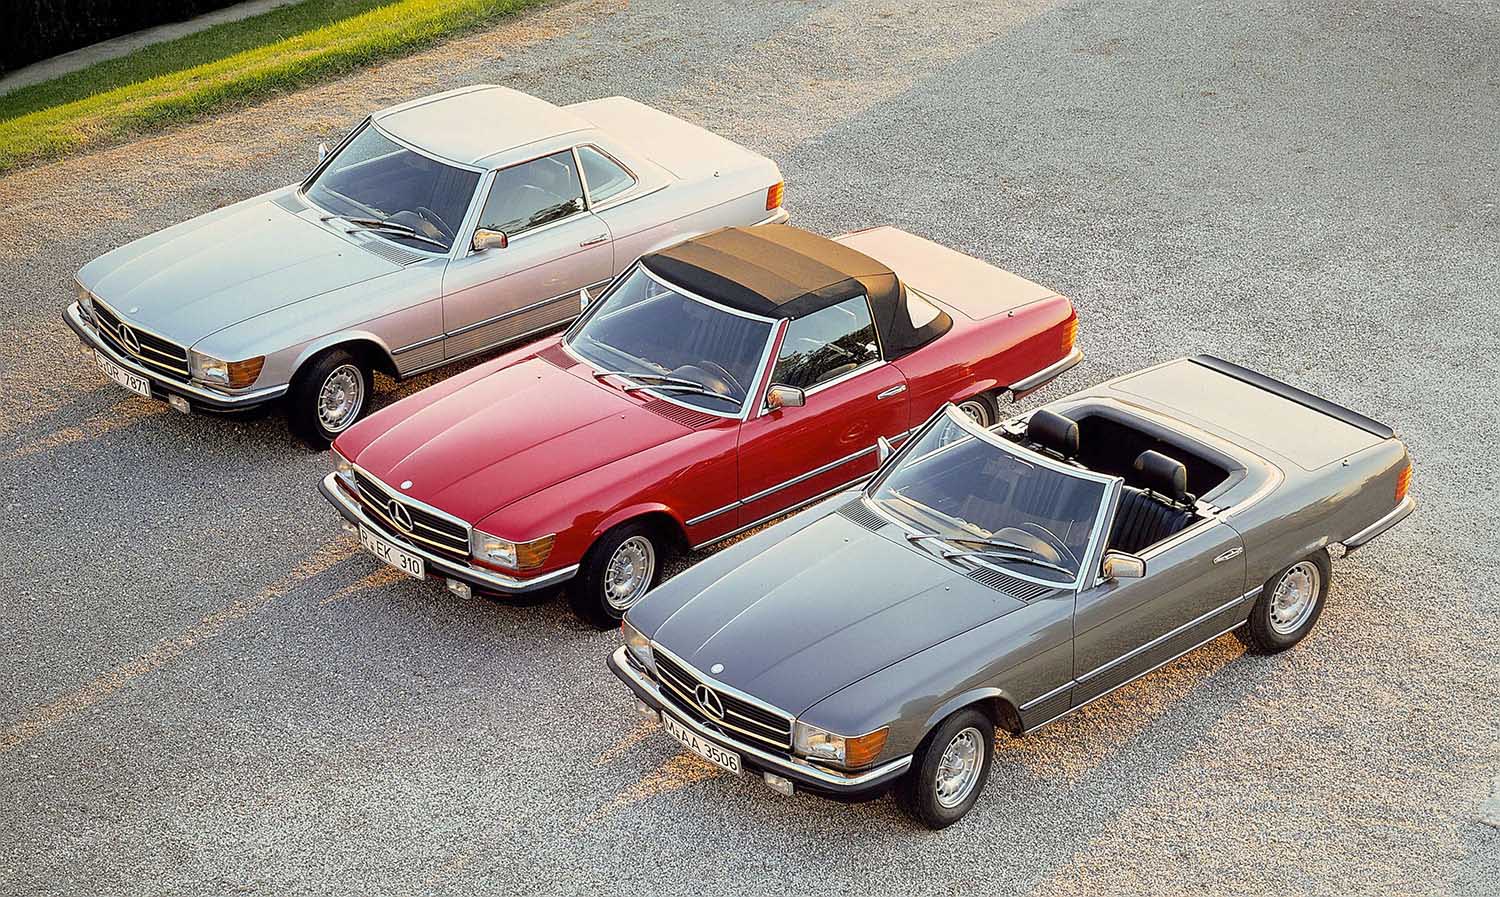 1971 to 1989 (R107) Mercedes-Benz SL-Class trio (from left to right) in silver, red, and gray displaying the hardtop, closed-softtop, and open-top-convertible states of configuration.